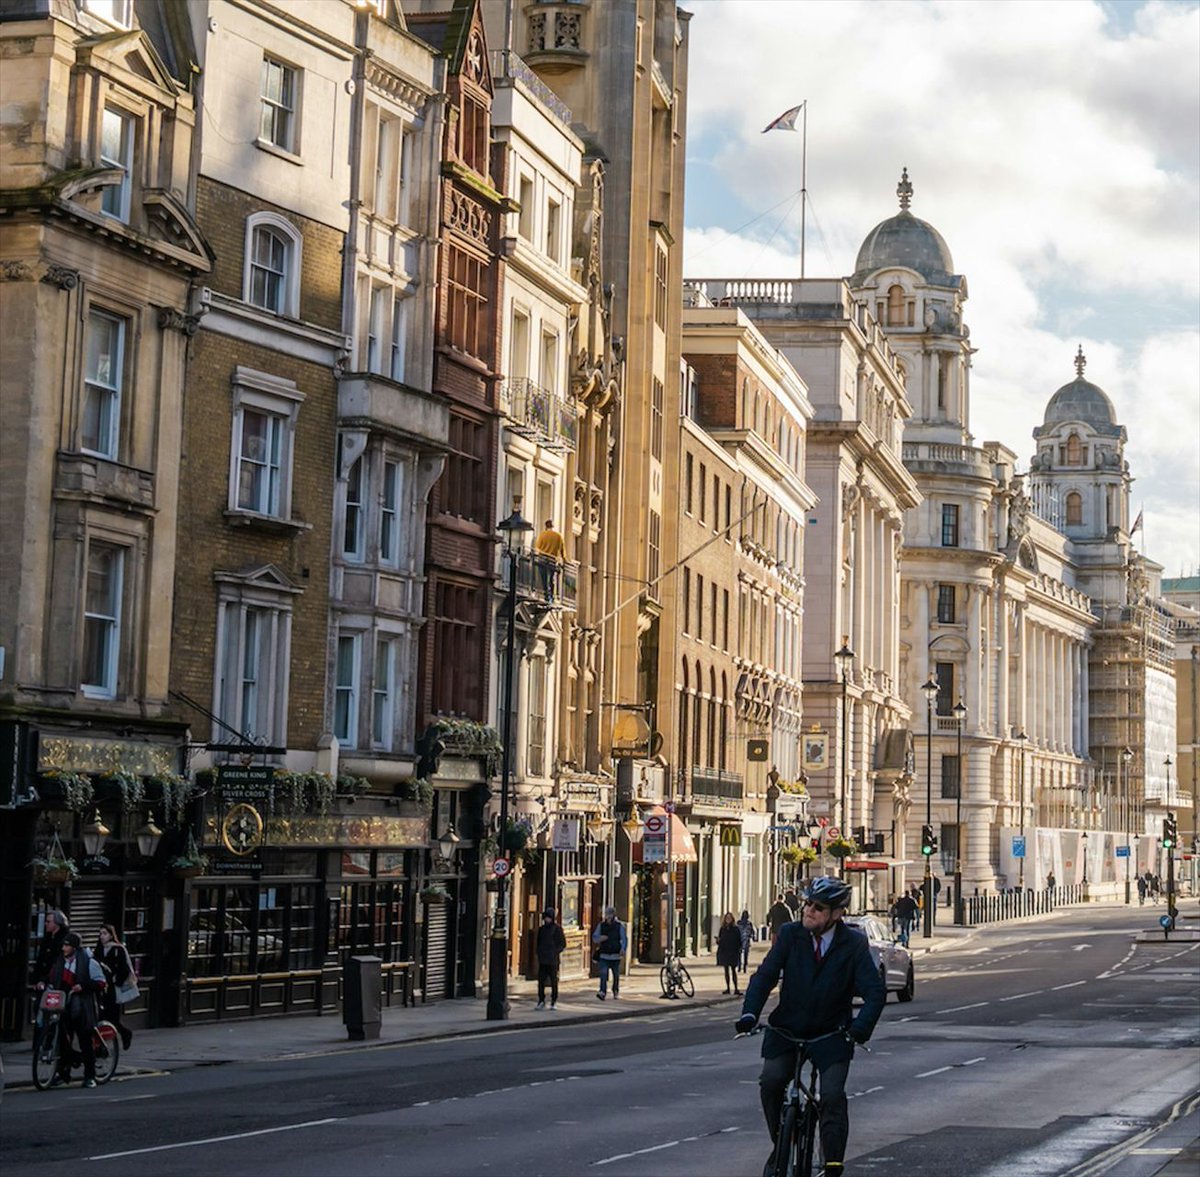 JOIN OUR LONDON #WALK Skyline, style wars and carbuncles – walking from the Eleanor Cross to the Channel Four building. Our guide is Sarah Jackson, an #architect and townscape consultant. This #tour looks at the effect culture wars have had on #London buff.ly/4a9aB2E